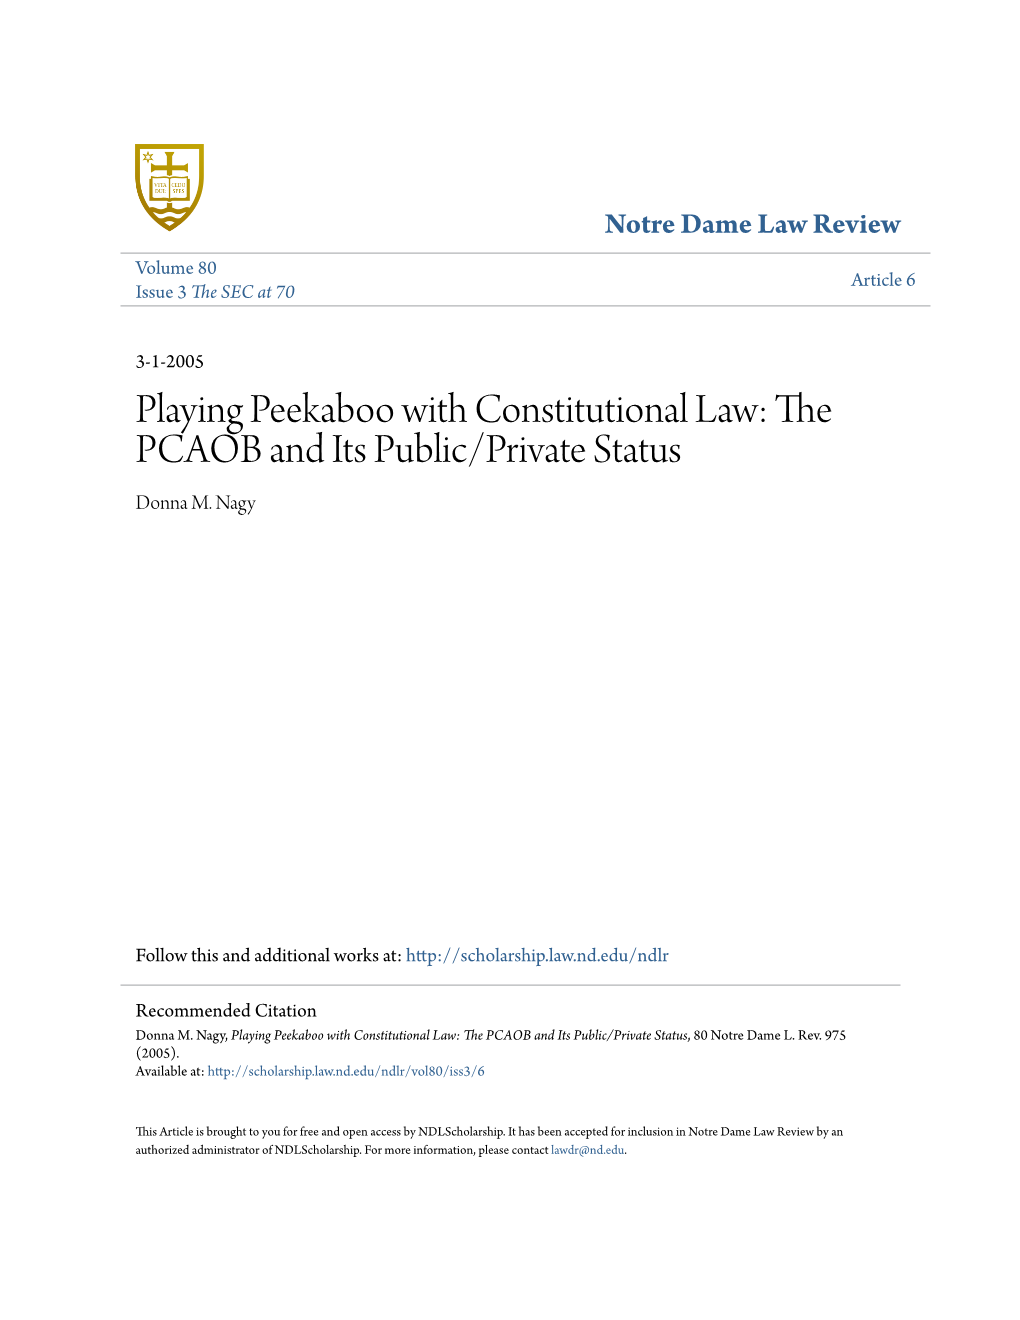 Playing Peekaboo with Constitutional Law: the PCAOB and Its Public/Private Status Donna M